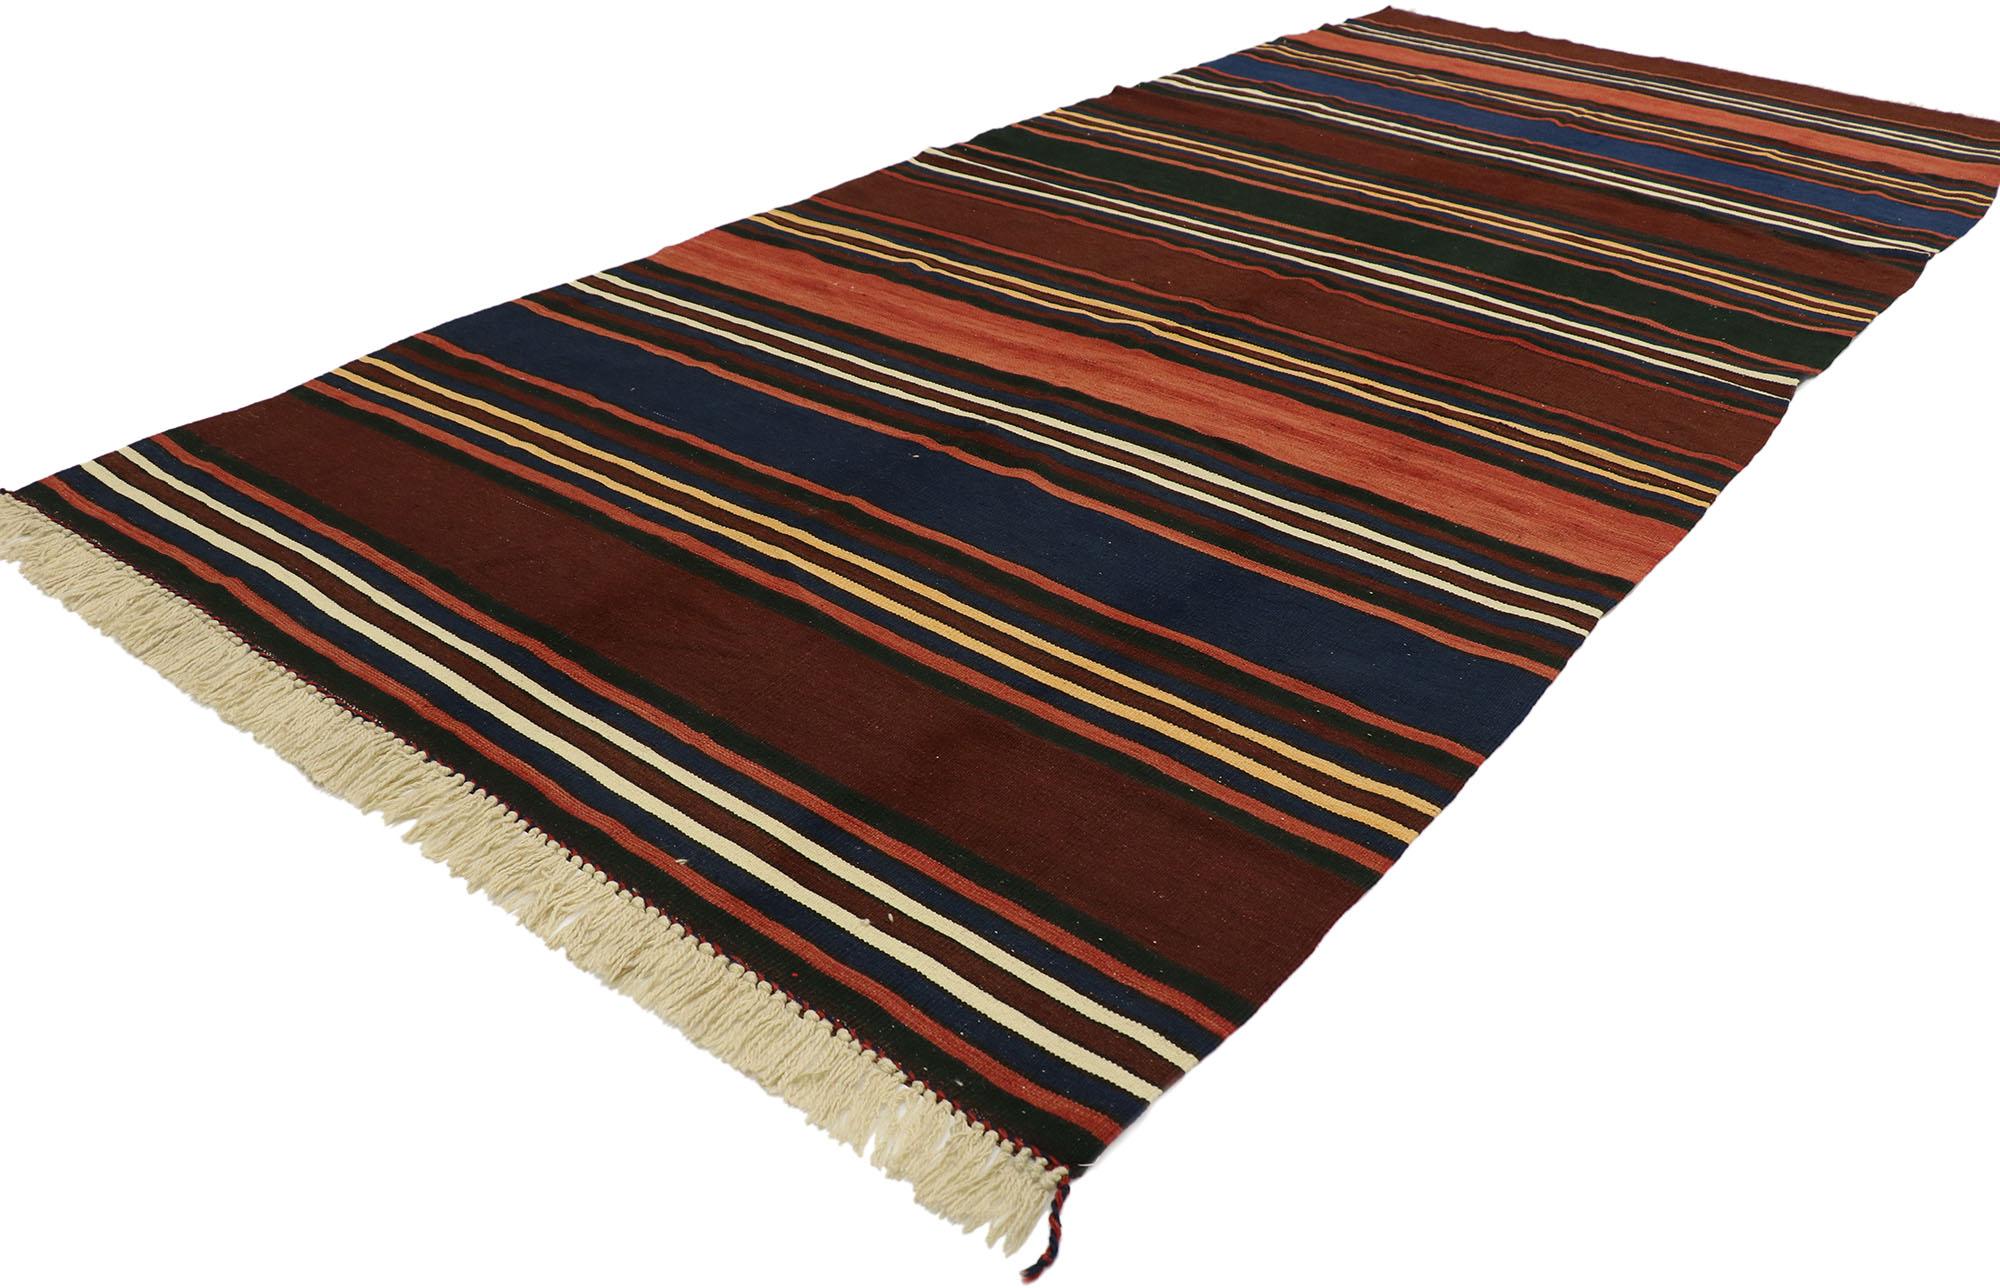 53120 vintage Turkish Kilim rug with Modern Cabin Adirondack style. With its warm hues and rugged beauty, this handwoven wool striped kilim rug manages to meld contemporary, modern, and traditional design elements. The flat-weave kilim rug features